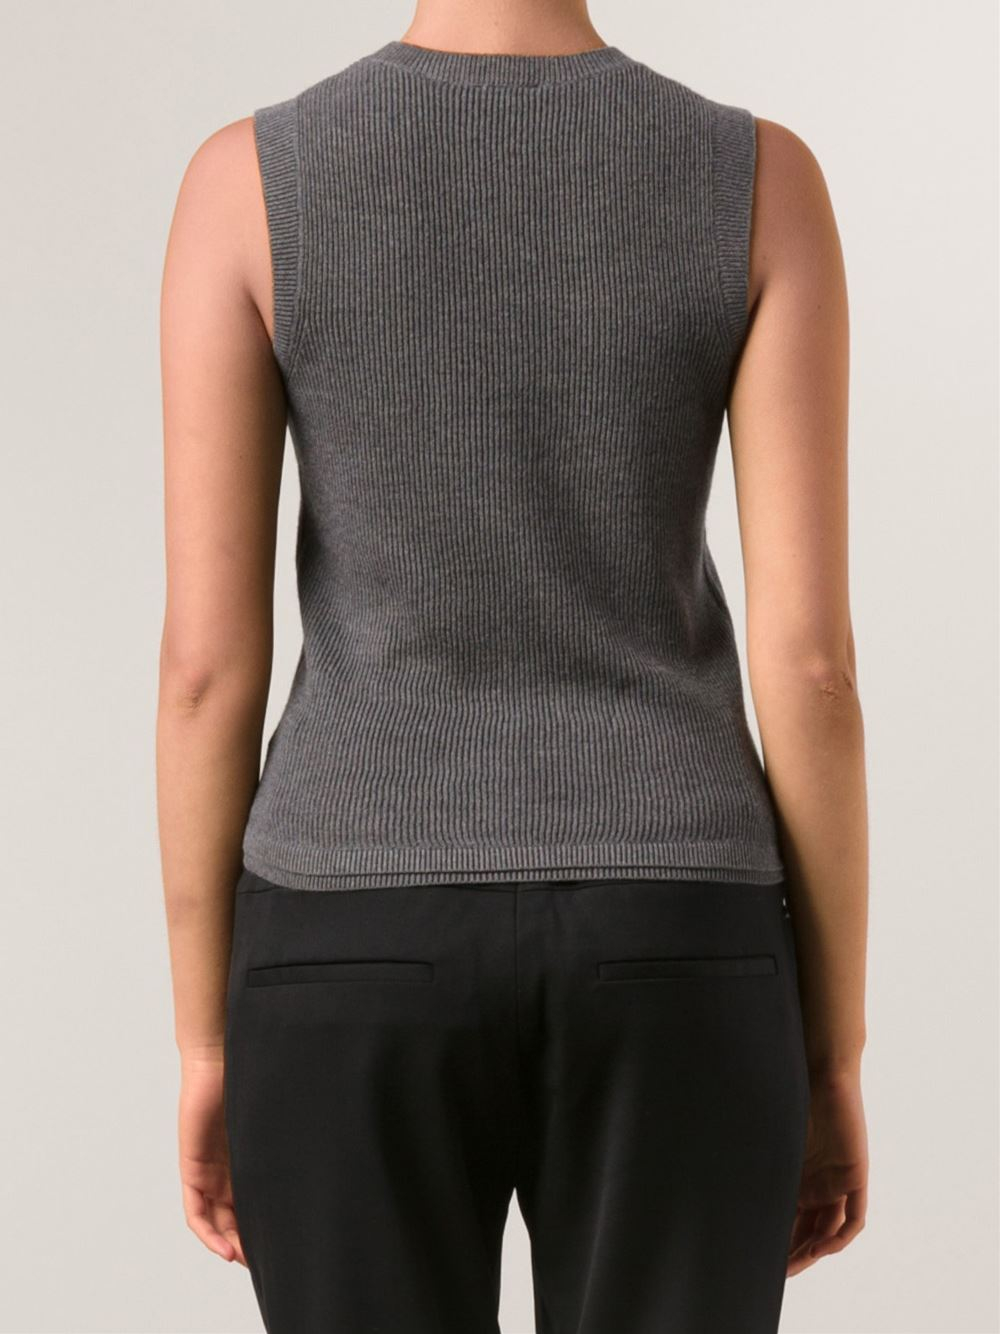 L'Agence Shell Top in Grey (Gray) - Lyst